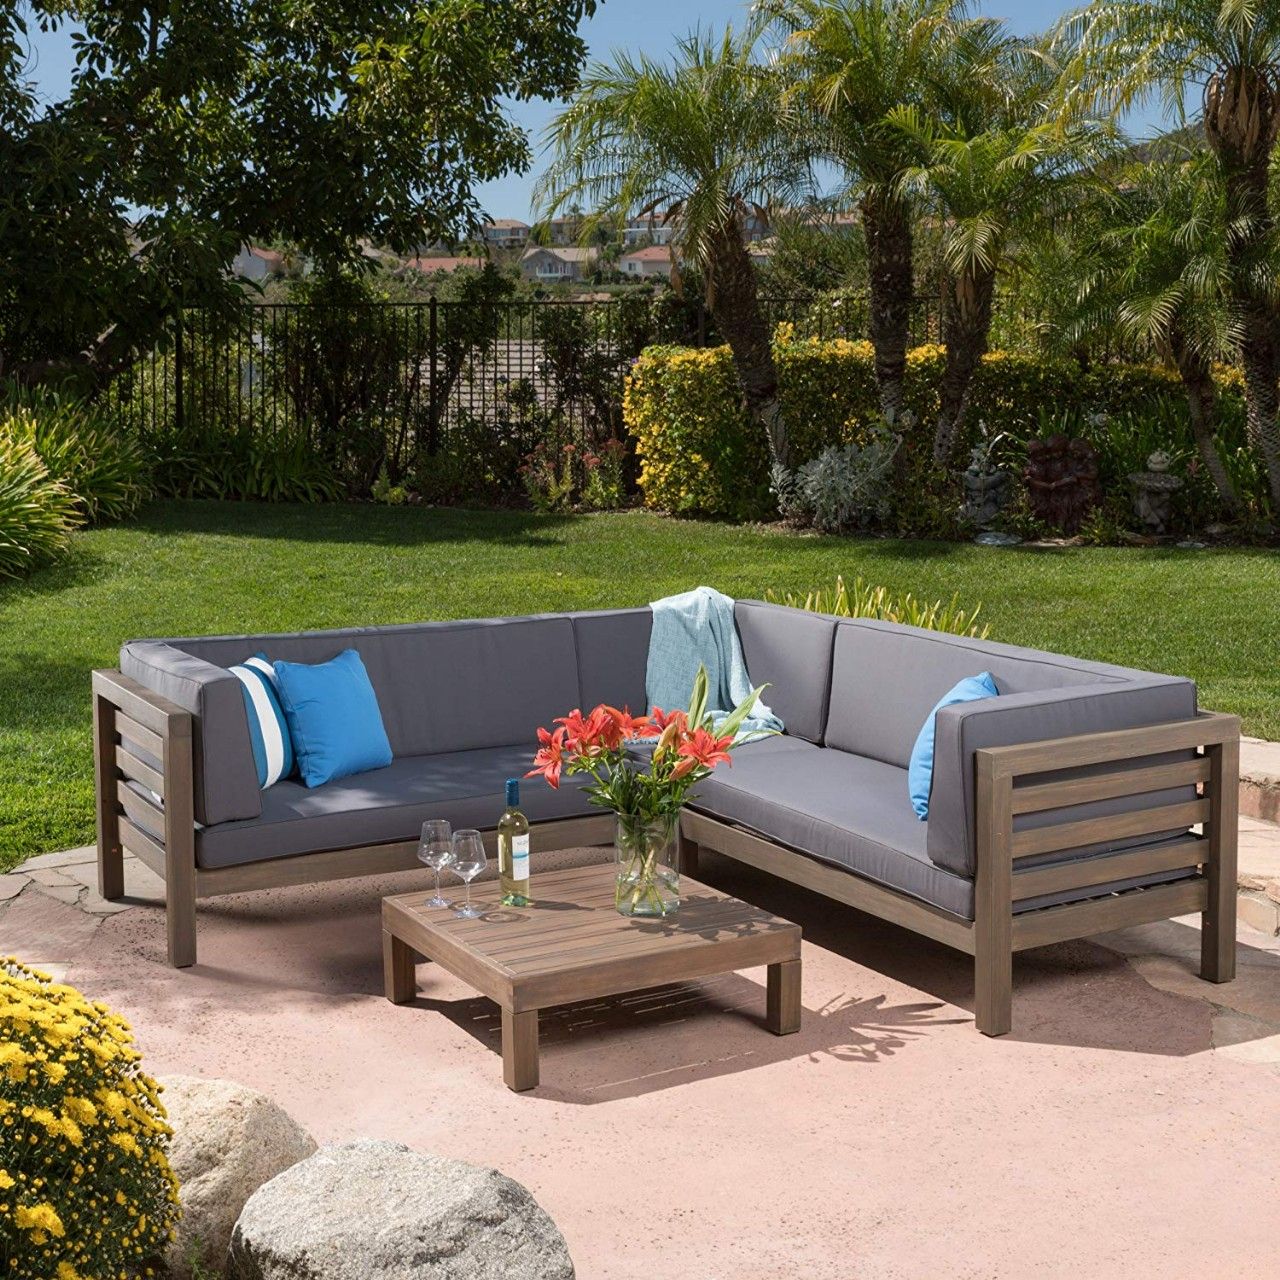 Outdoor Patio Furniture Set Cushioned Pe Rattan Sectional Garden Sofa Within 4 Piece Gray Outdoor Patio Seating Sets (View 4 of 15)